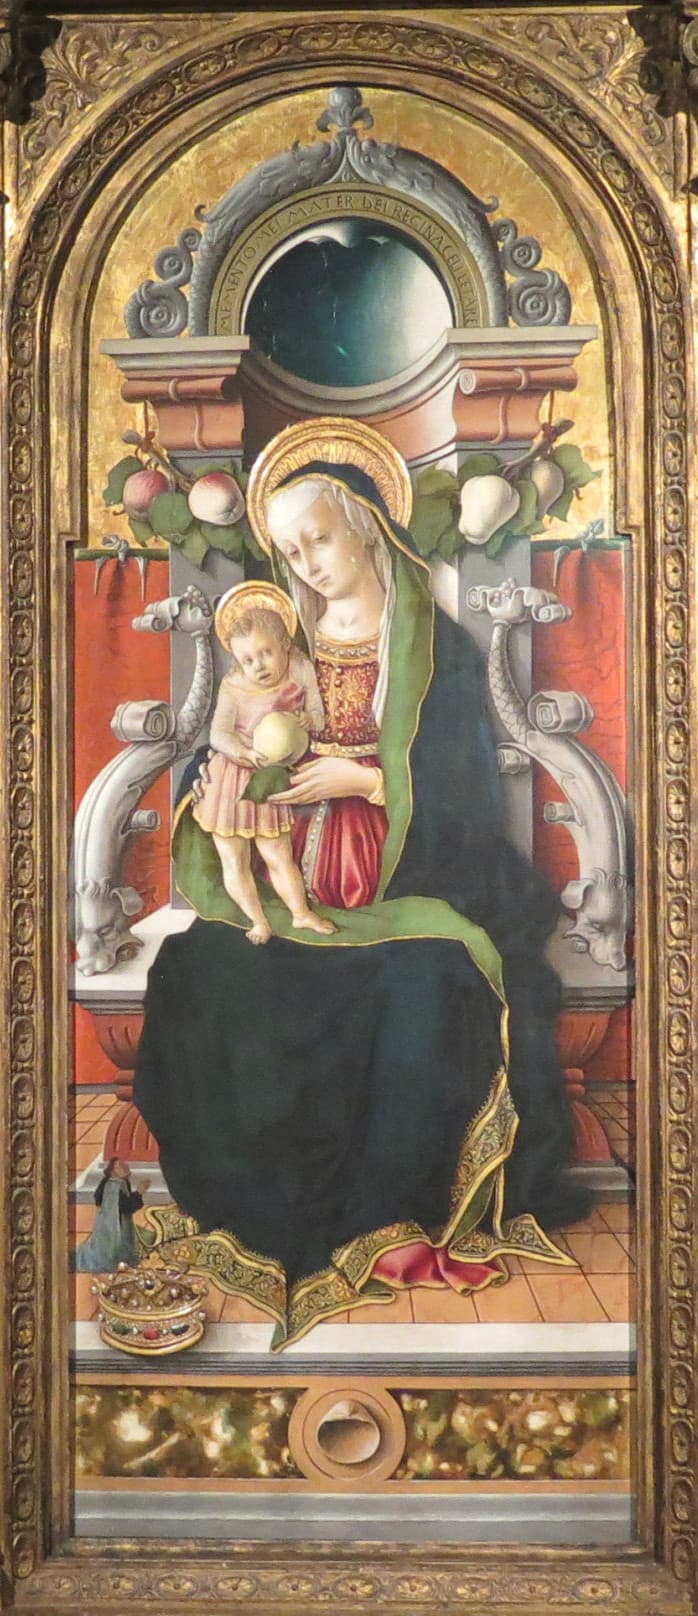 One of Crivelli's paintings from the altarpiece. (Courtesy of the Gardner Museum)